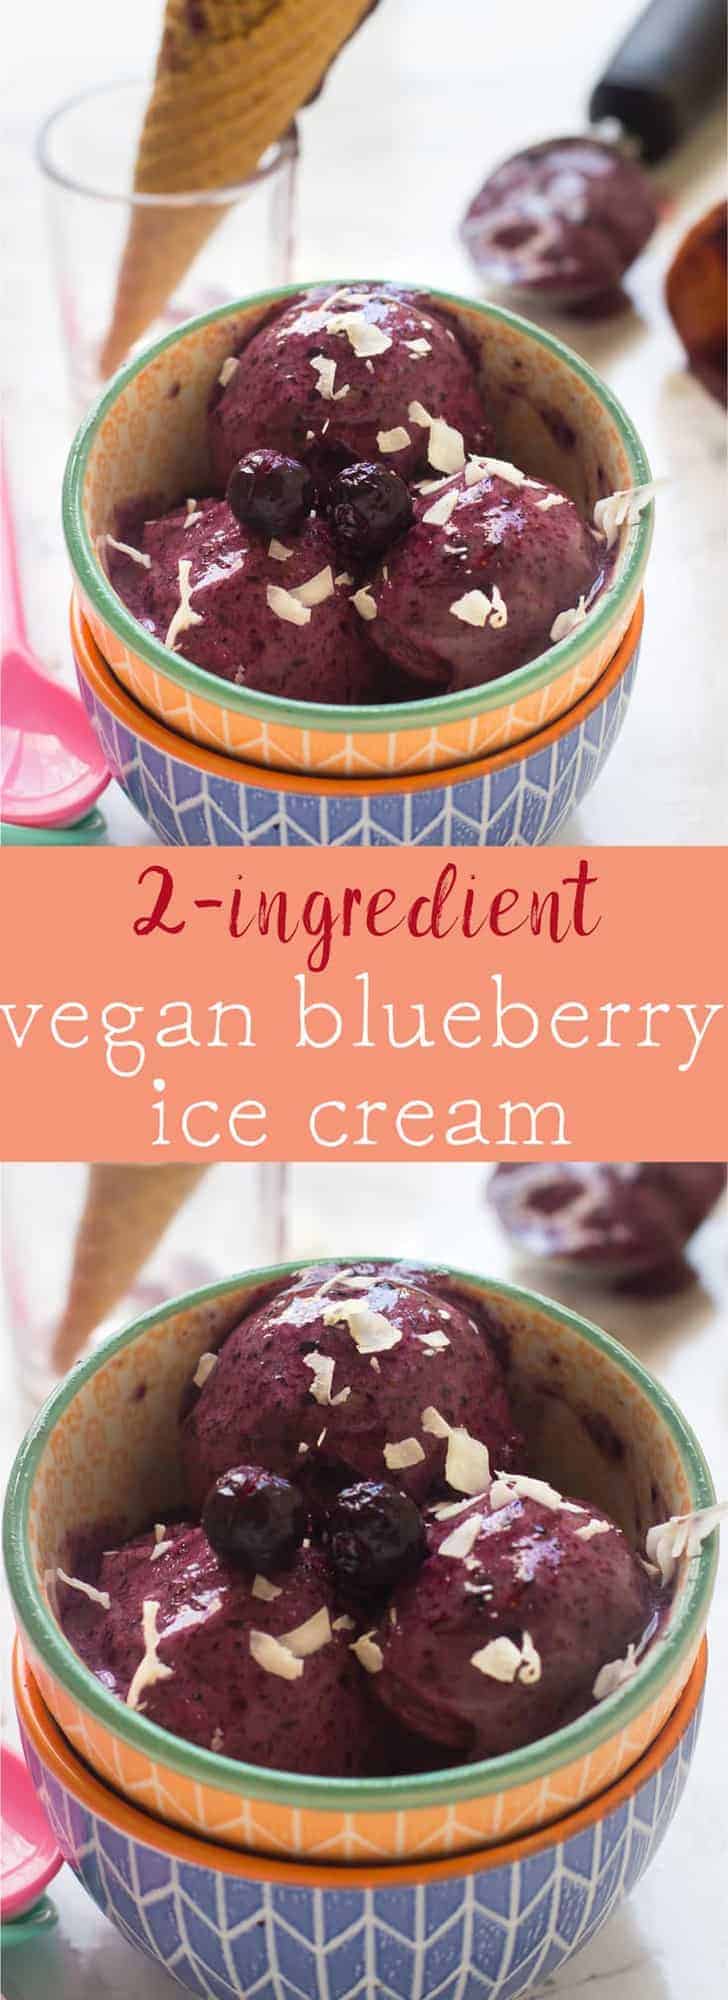 This 2-Ingredient Vegan Blueberry Ice Cream (no churn) is creamy, healthy, absolutely delicious and so easy that you can have ice cream in just 10 minutes! via jessicainthekitchen.com